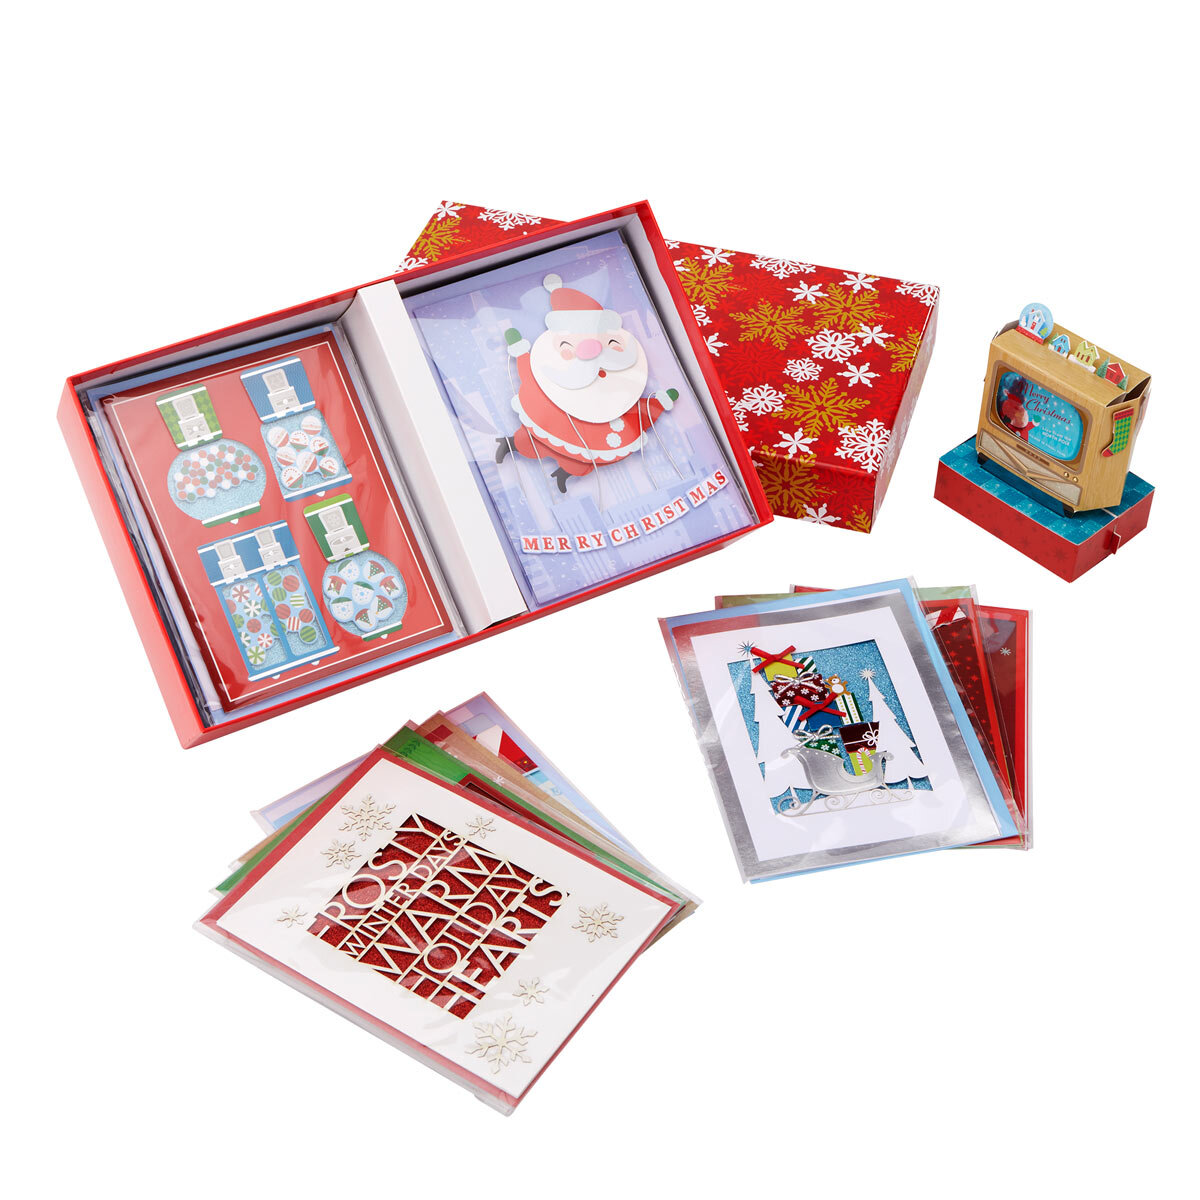 Buy 30 Pack Handmade Christmas Cards Included Image at Costco.co.uk